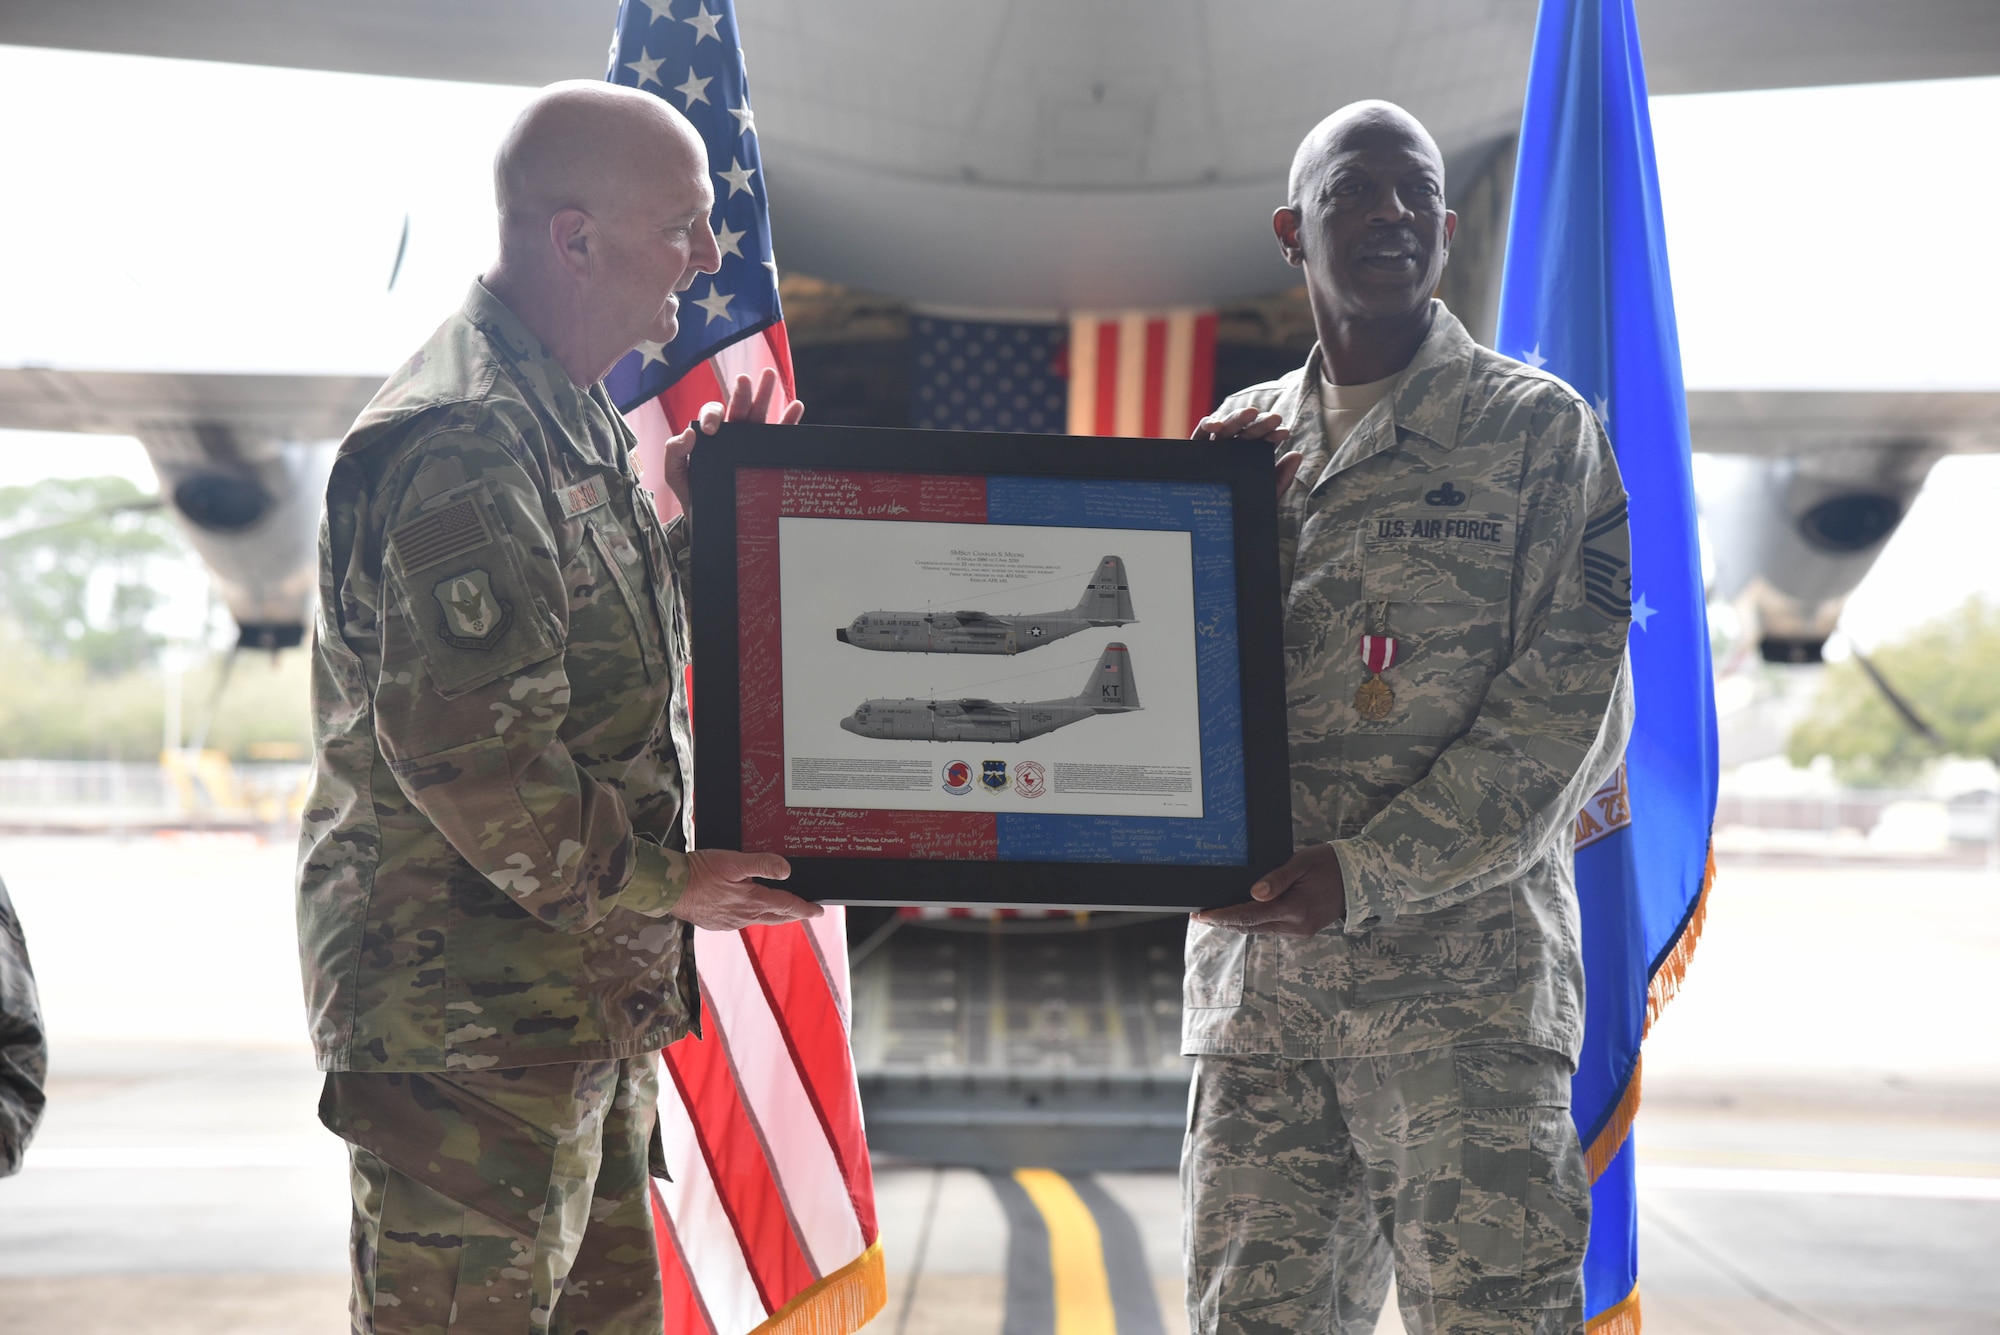 Senior Master Sgt. Charles Moore, 803rd Aircraft Maintenance Squadron production superintendent, accepts framed C-130J Super Hercules aircraft artwork from Col. Jay Johnson, 403rd Maintenance Group commander, during Moore's retirement ceremony, March 8, 2019.  Moore officially retires April 1, 2019, after serving 33 years in the Air Force Reserve. (U.S. Air Force photo by Tech. Sgt. Michael Farrar)